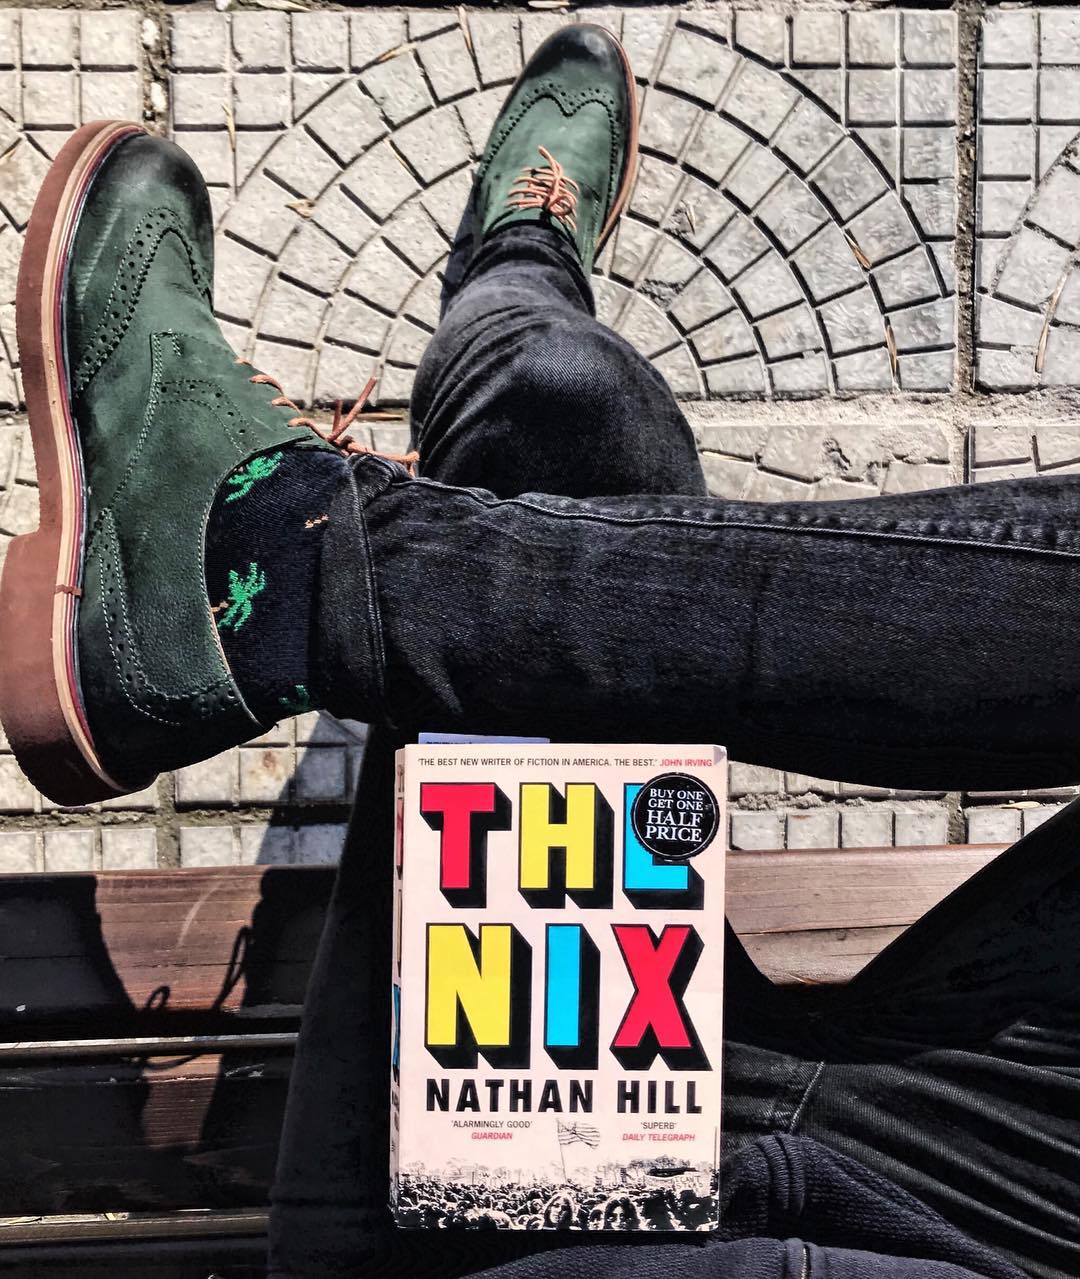 THE NIX by Nathan Hill